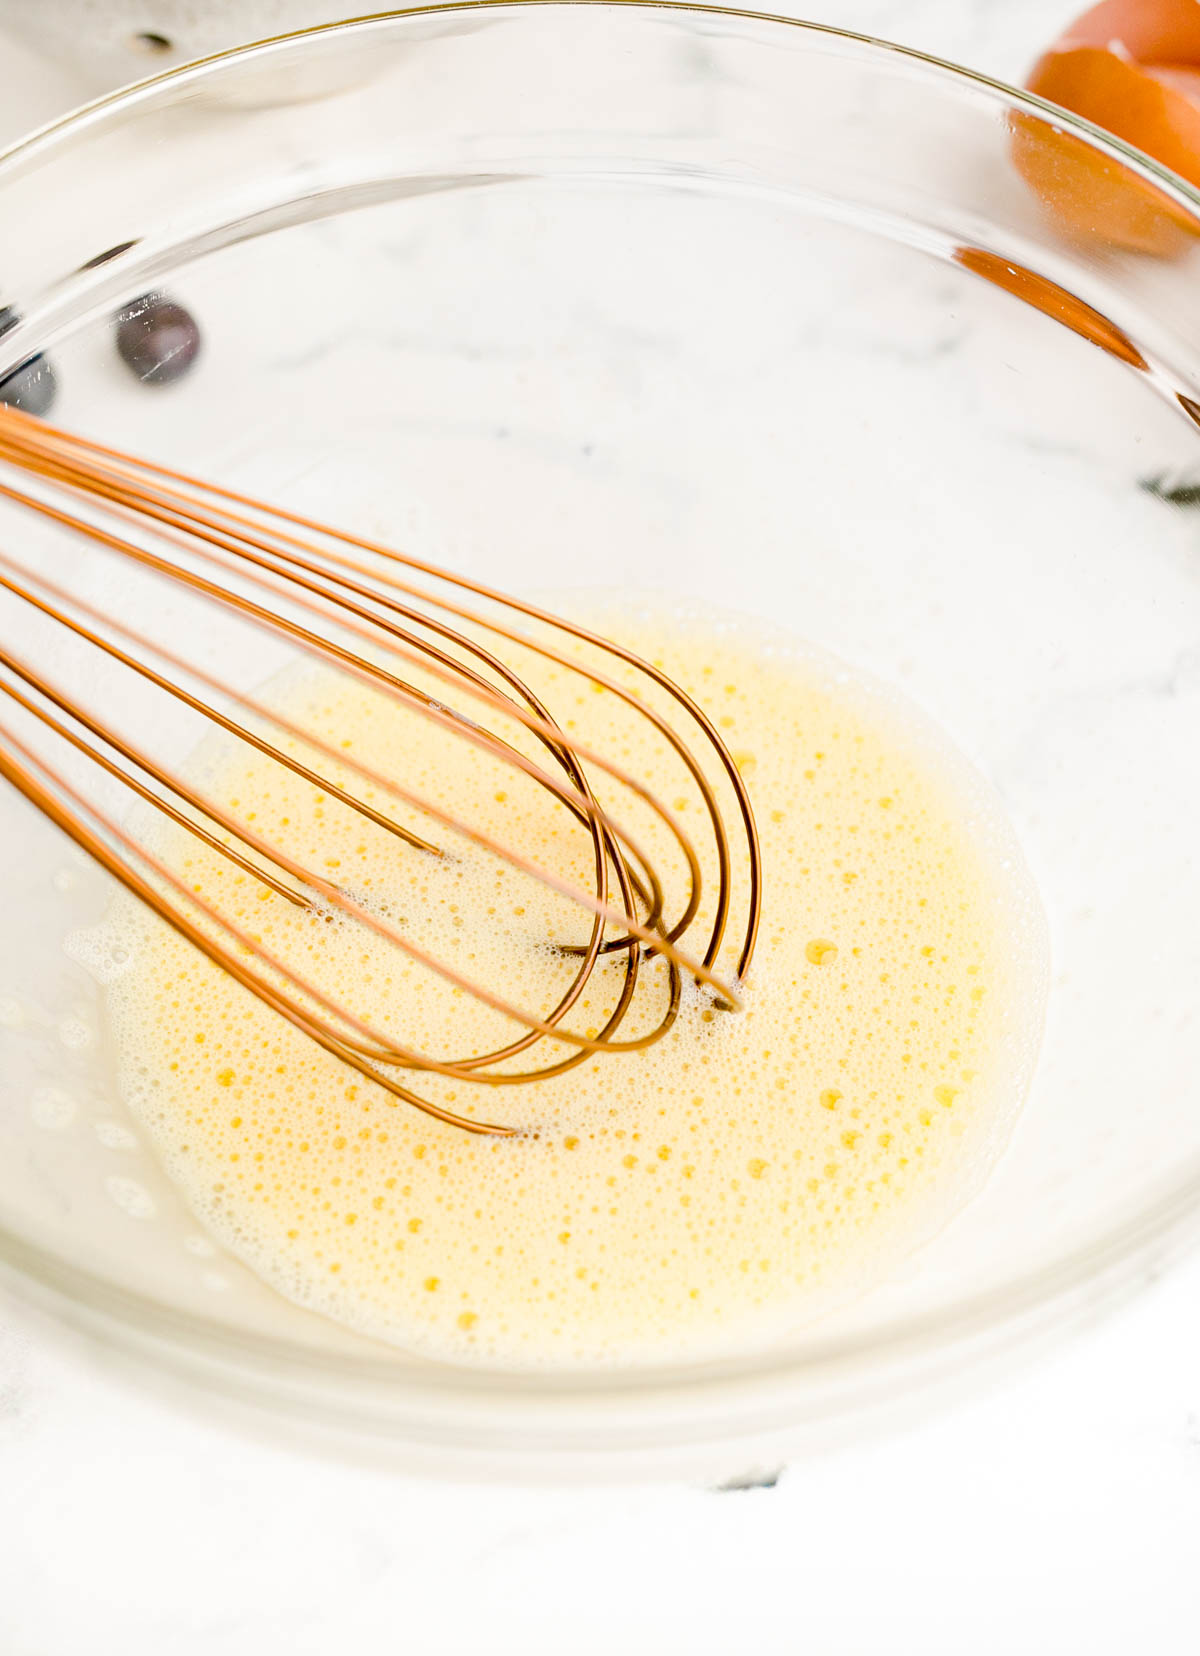 Egg being whisked in a glass mixing bowl.